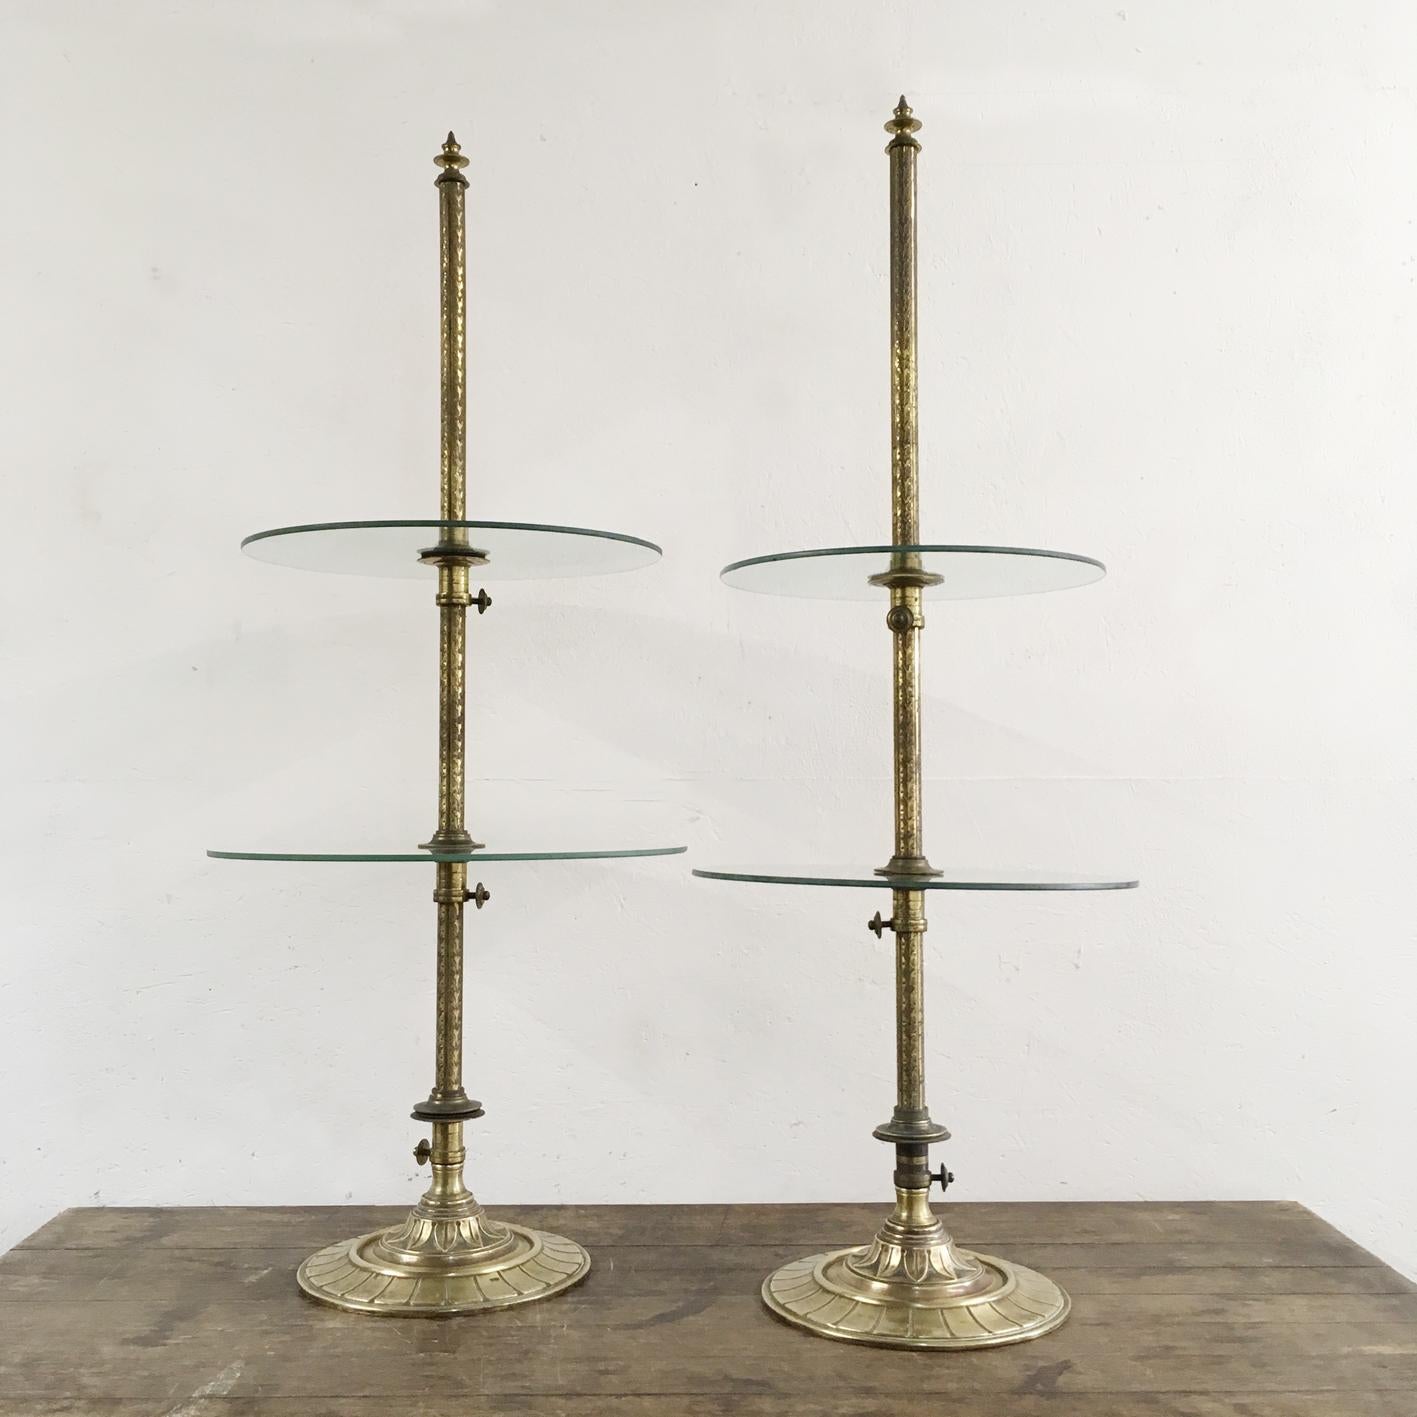 Harris & Sheldon Edwardian brass confectionary shop display stands
1910
A pair of antique Edwardian display stands
The brass work is decorated with small floral patterns and leaf details on the foot
The makers stamp and reg mark cast into the